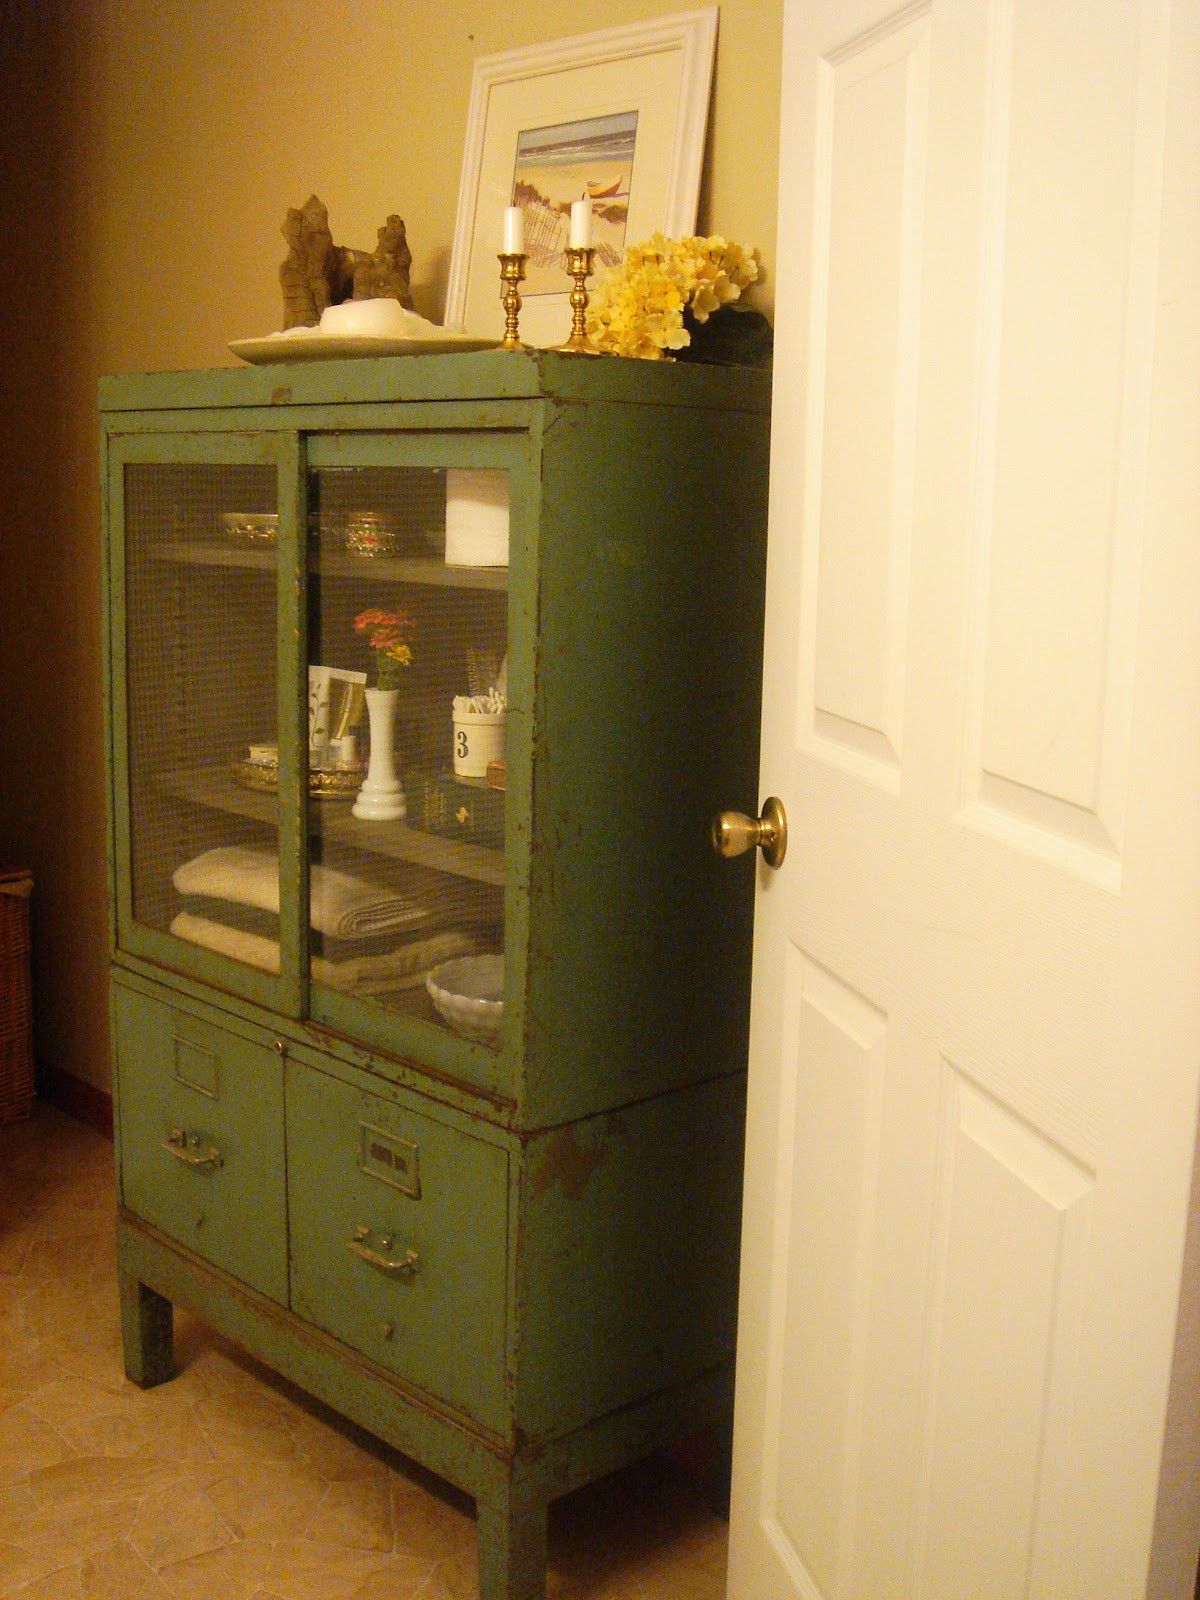 Antique Bathroom Cabinets
 Our Neck of the Woods Vintage Bathroom Cabinet